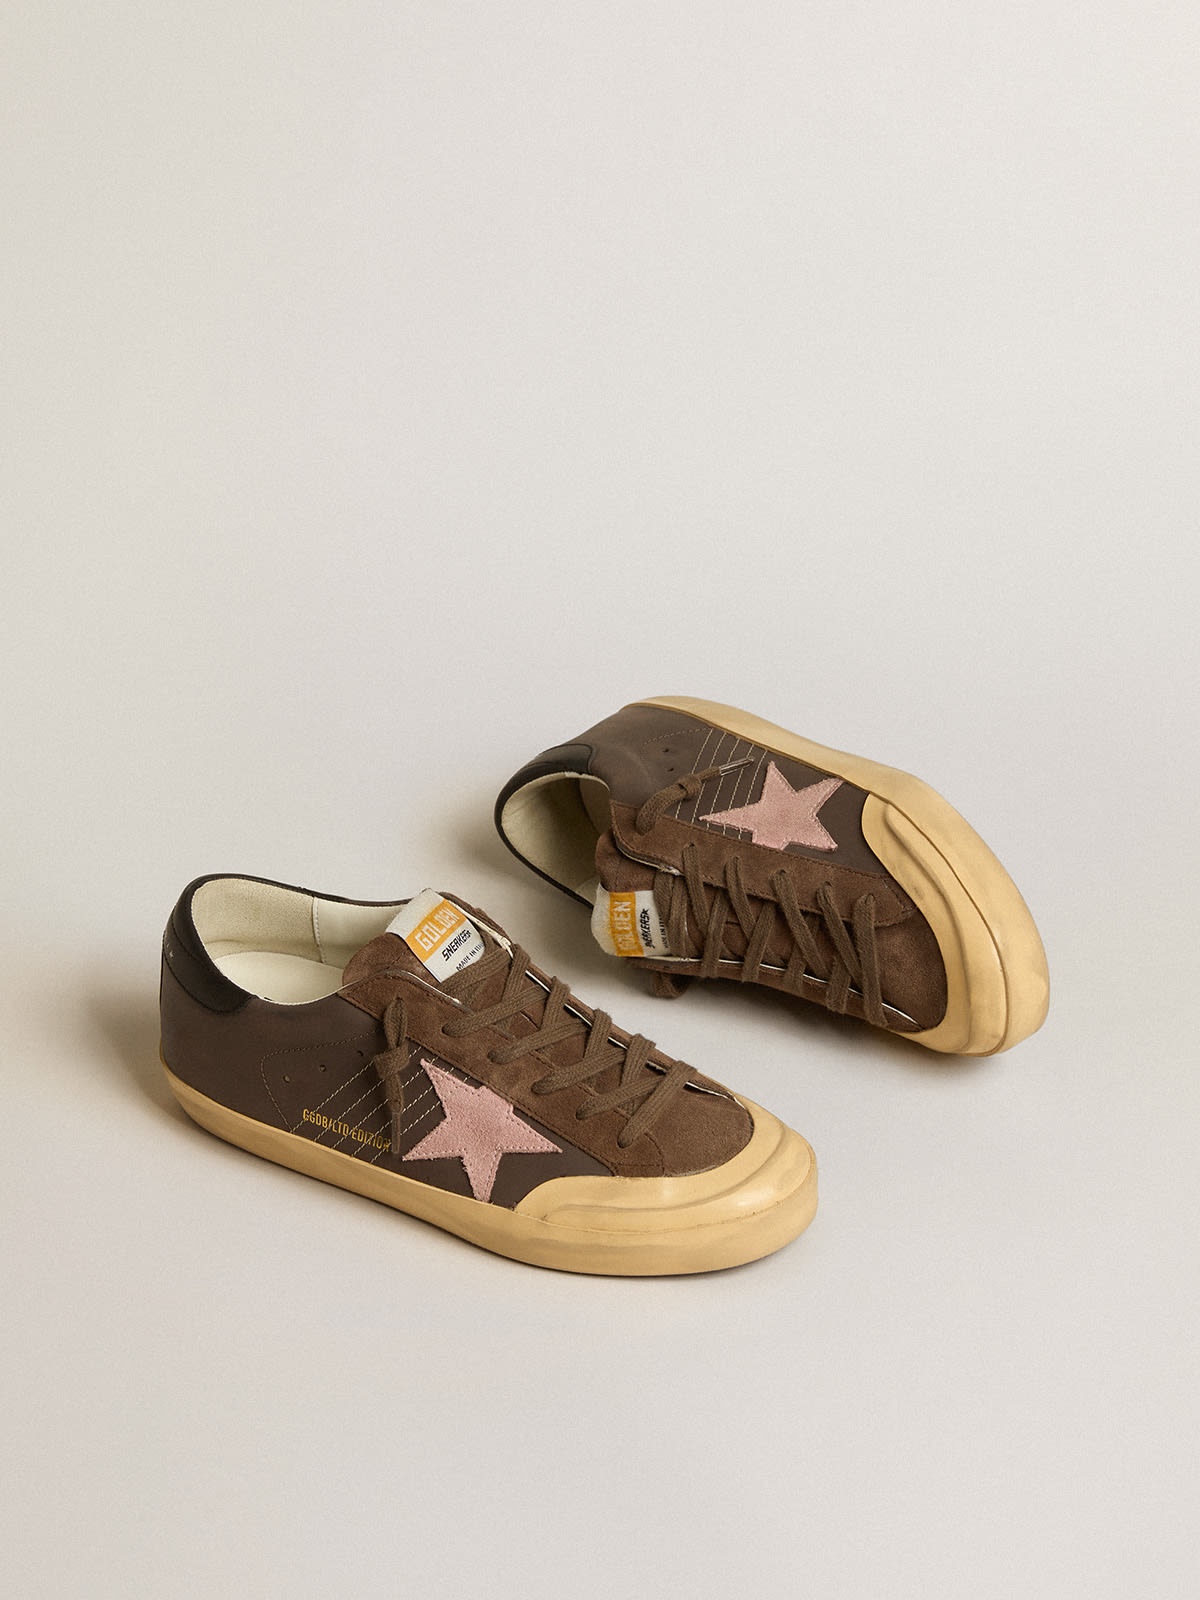 Super-Star Penstar LTD in brown leather with pink suede star - 2